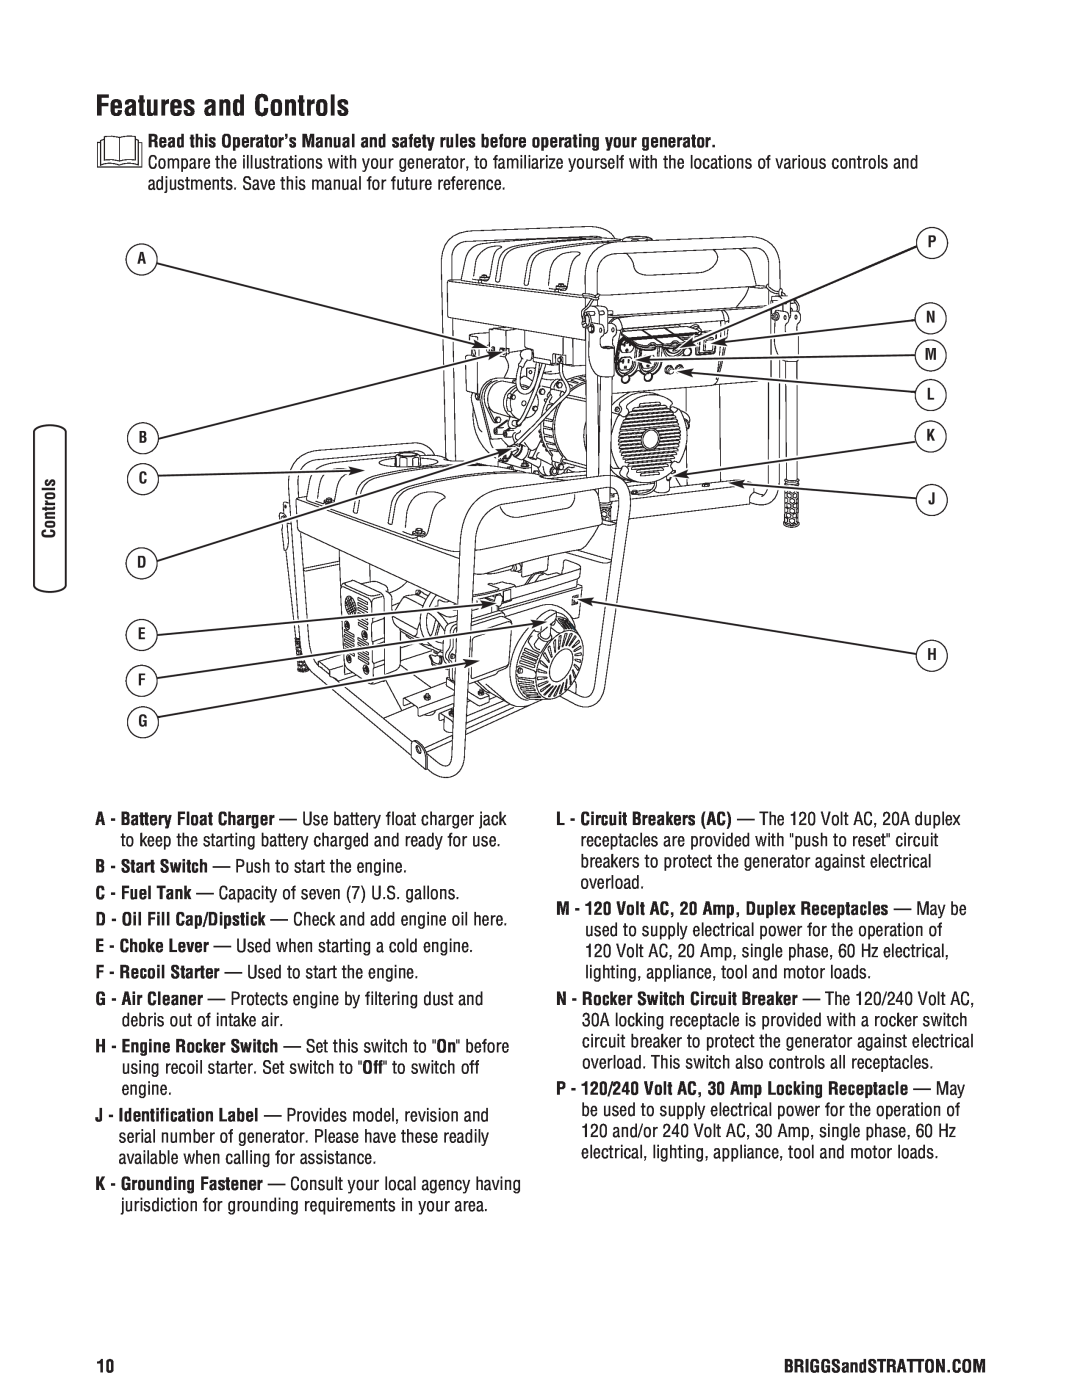 Briggs & Stratton 206405GS manual Features and Controls, B - Start Switch - Push to start the engine 